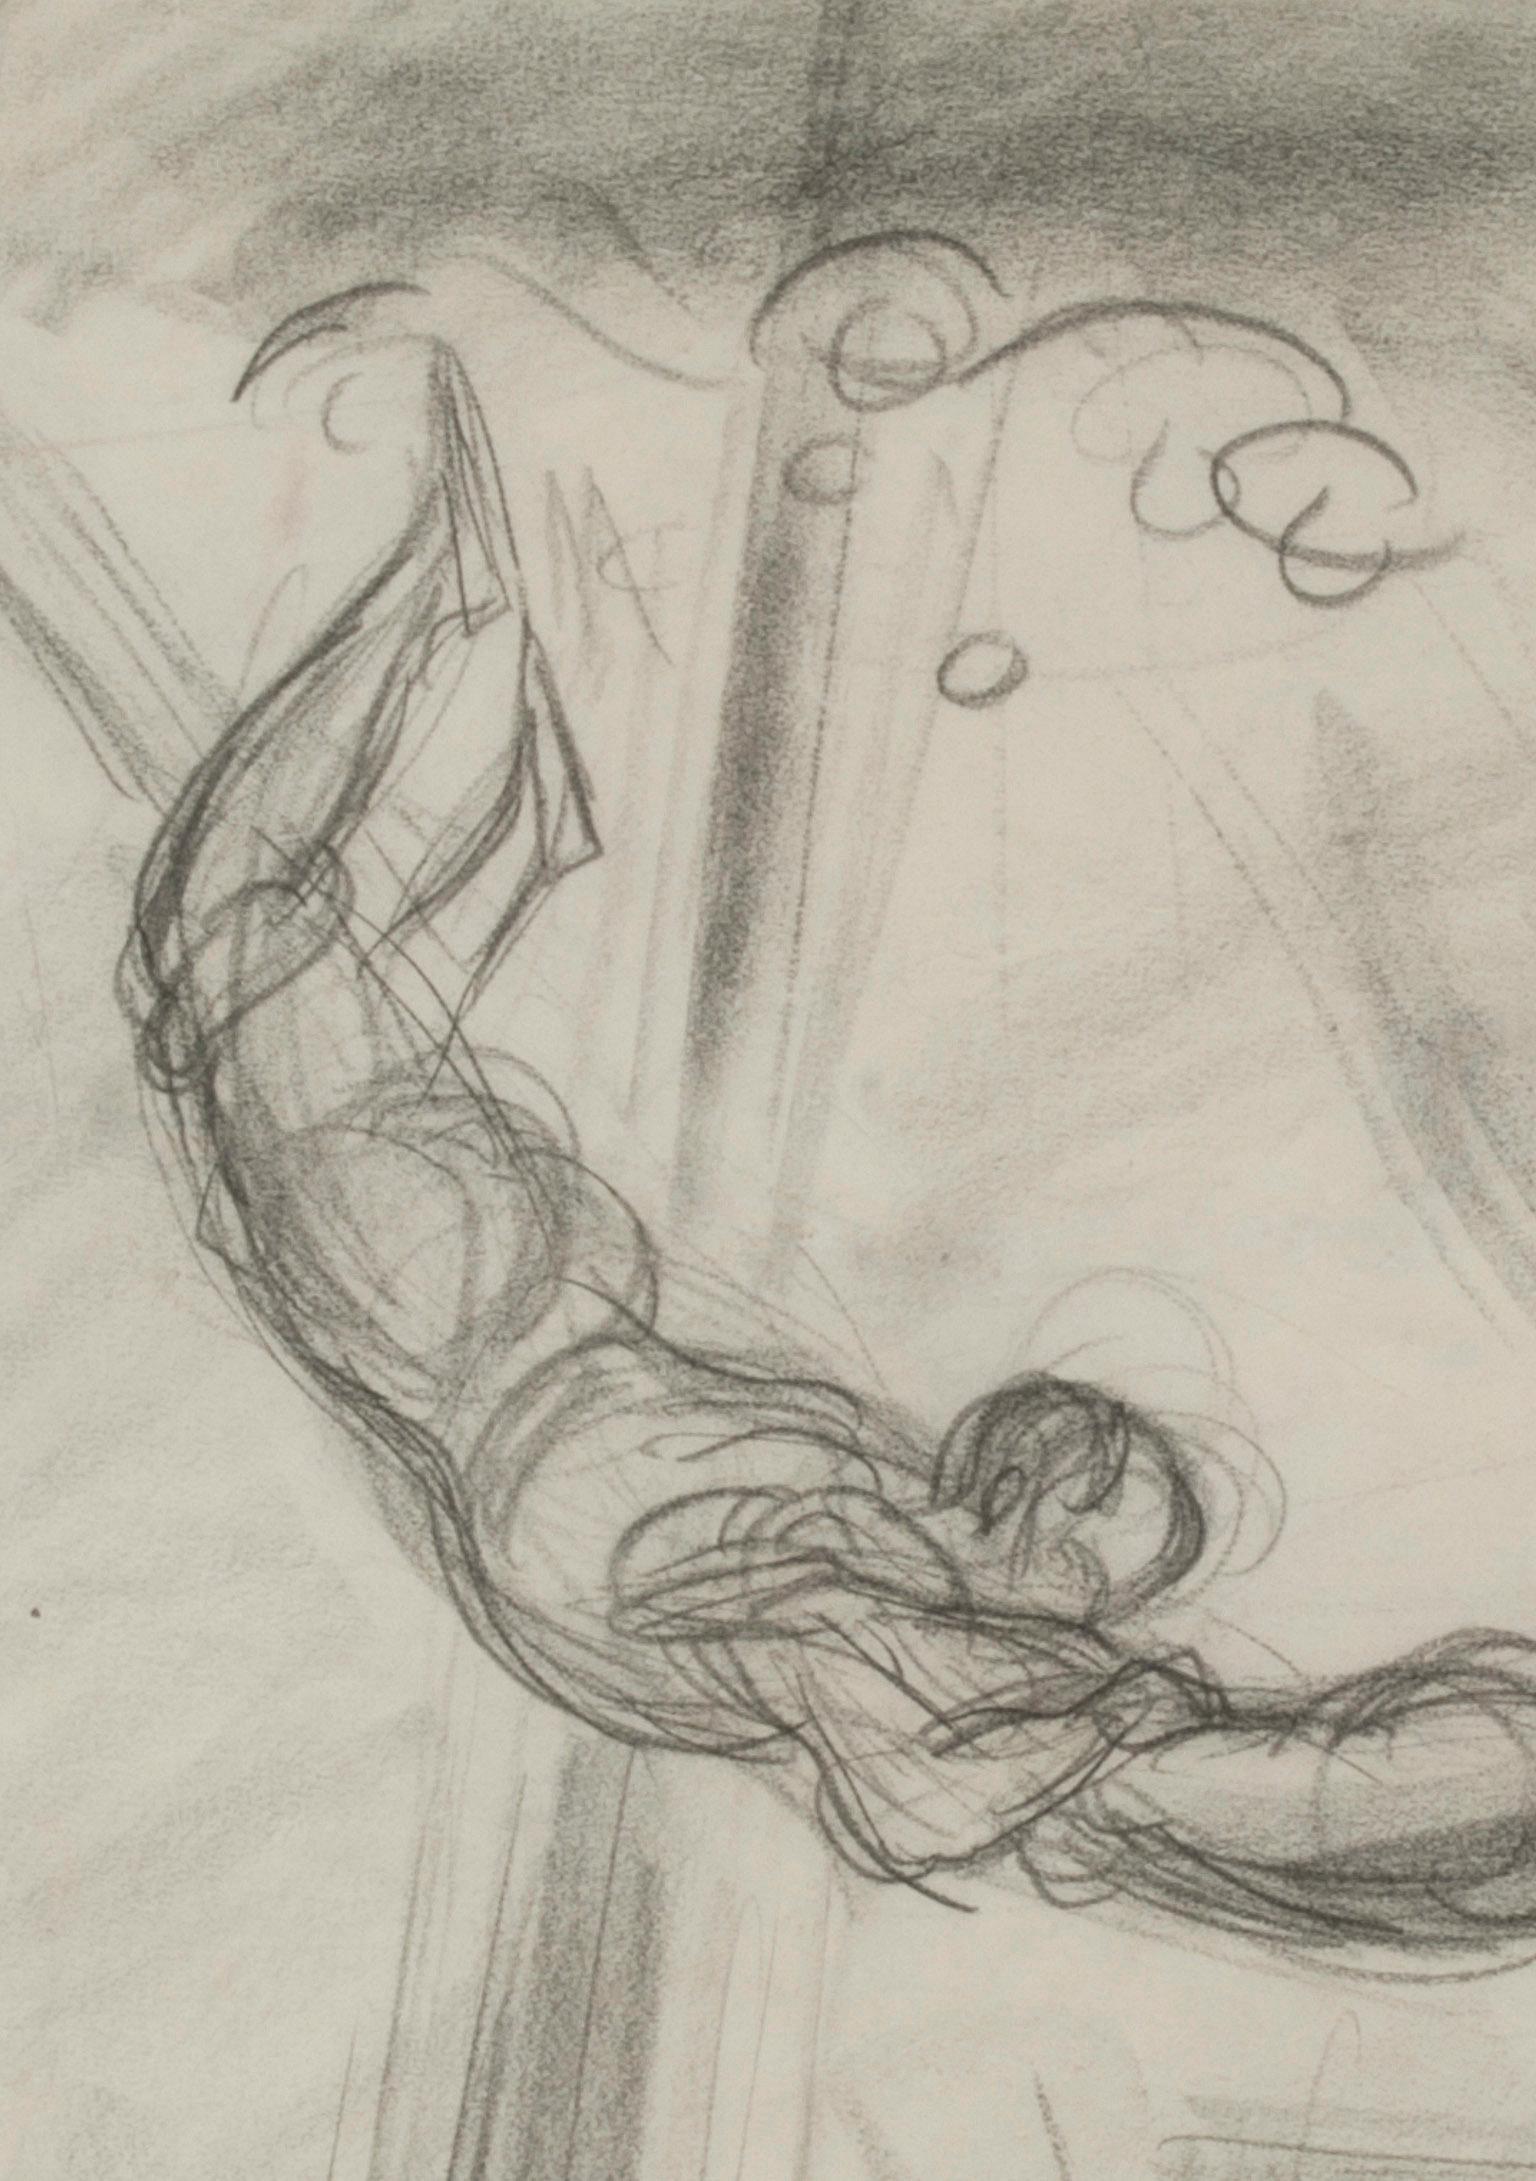 Untitled (Study for The Aerialists)
Graphite on paper, 1932
Signed lower right in pencil: 